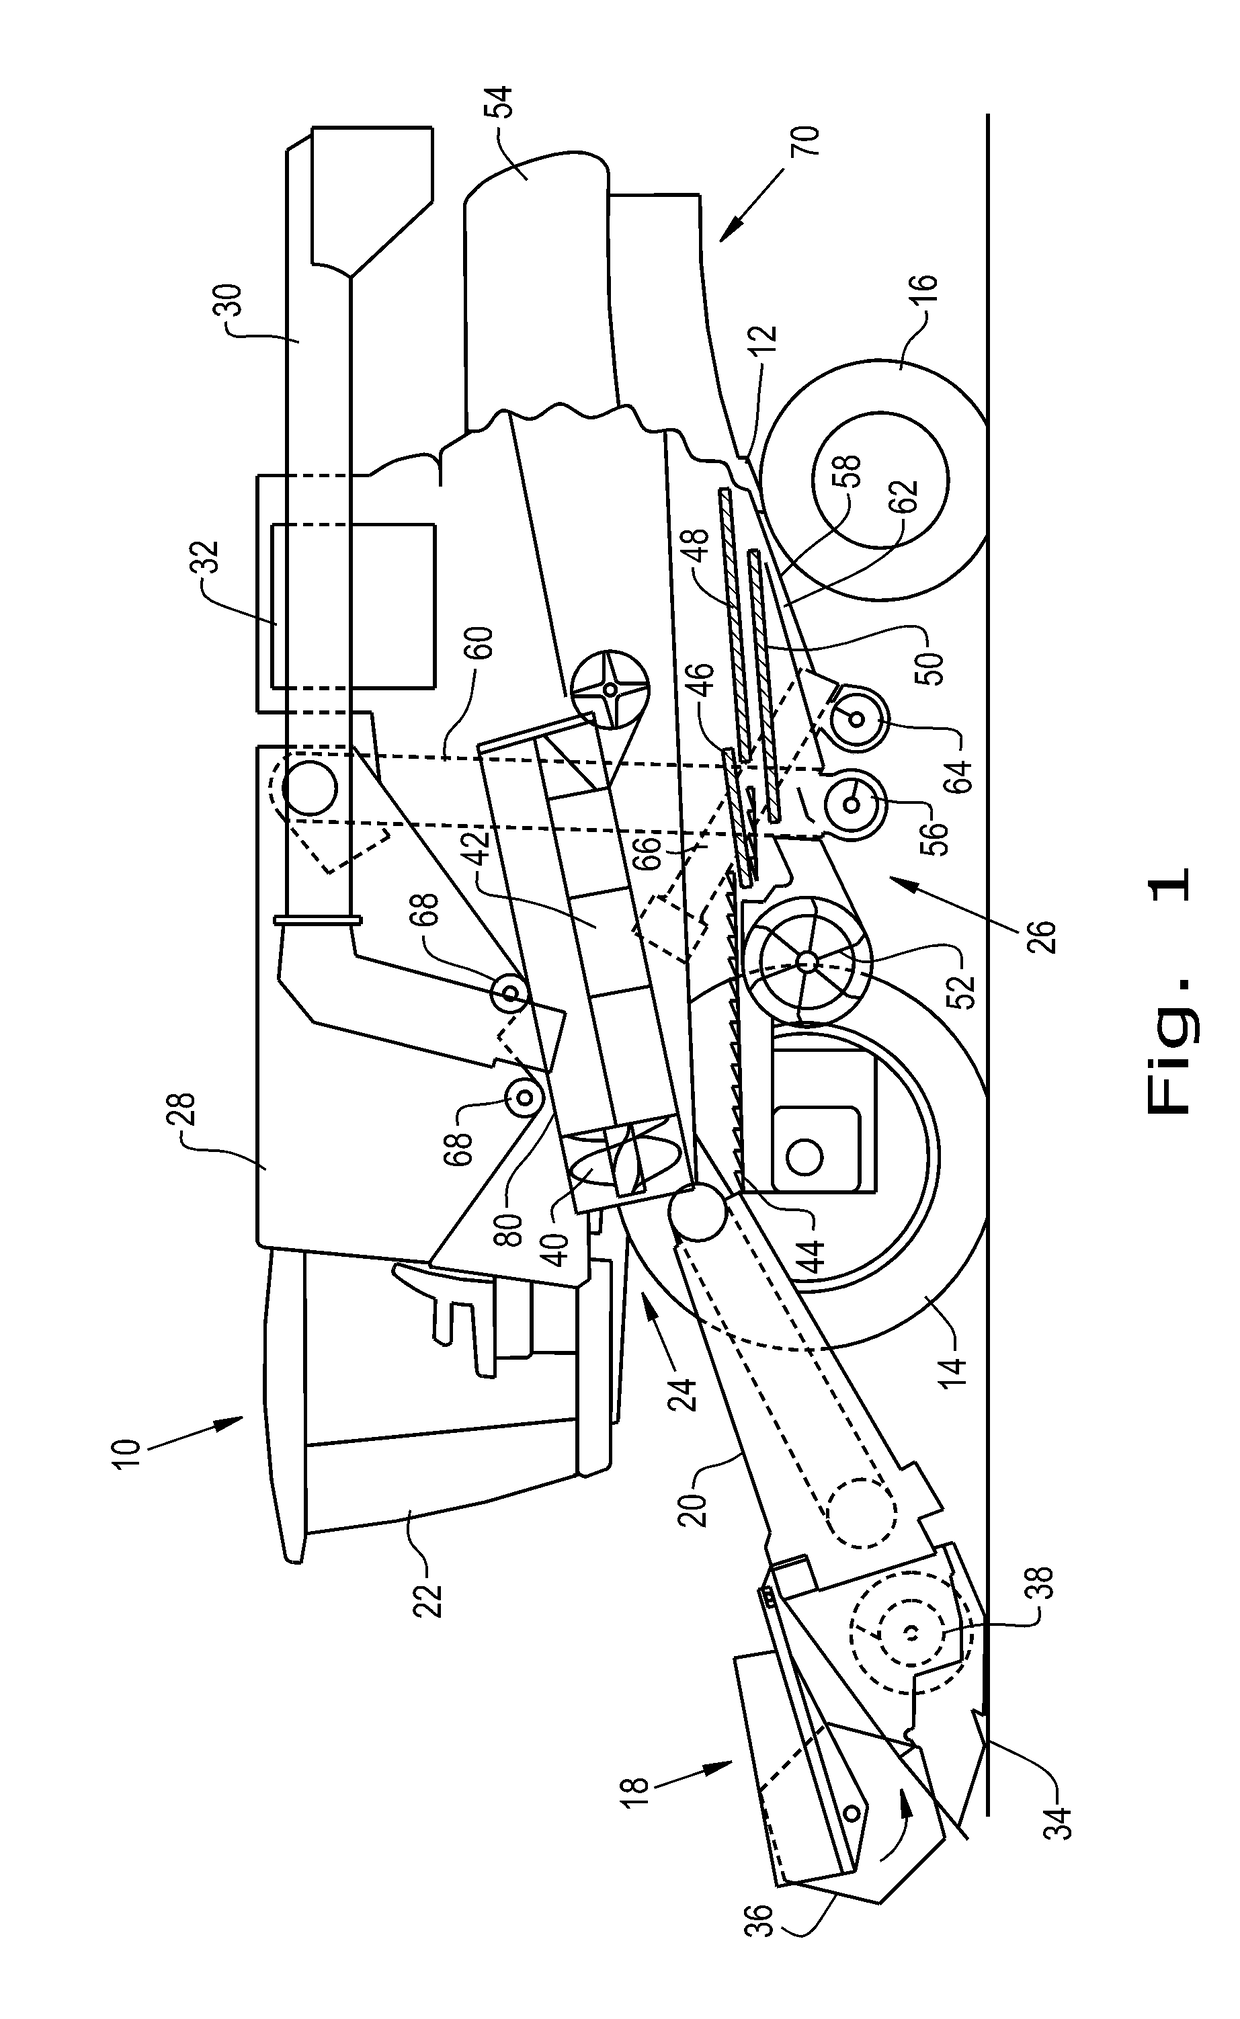 Control system and method for controlling two banks of adjustable vanes on a cylindrical rotor cage of an agricultural harvester